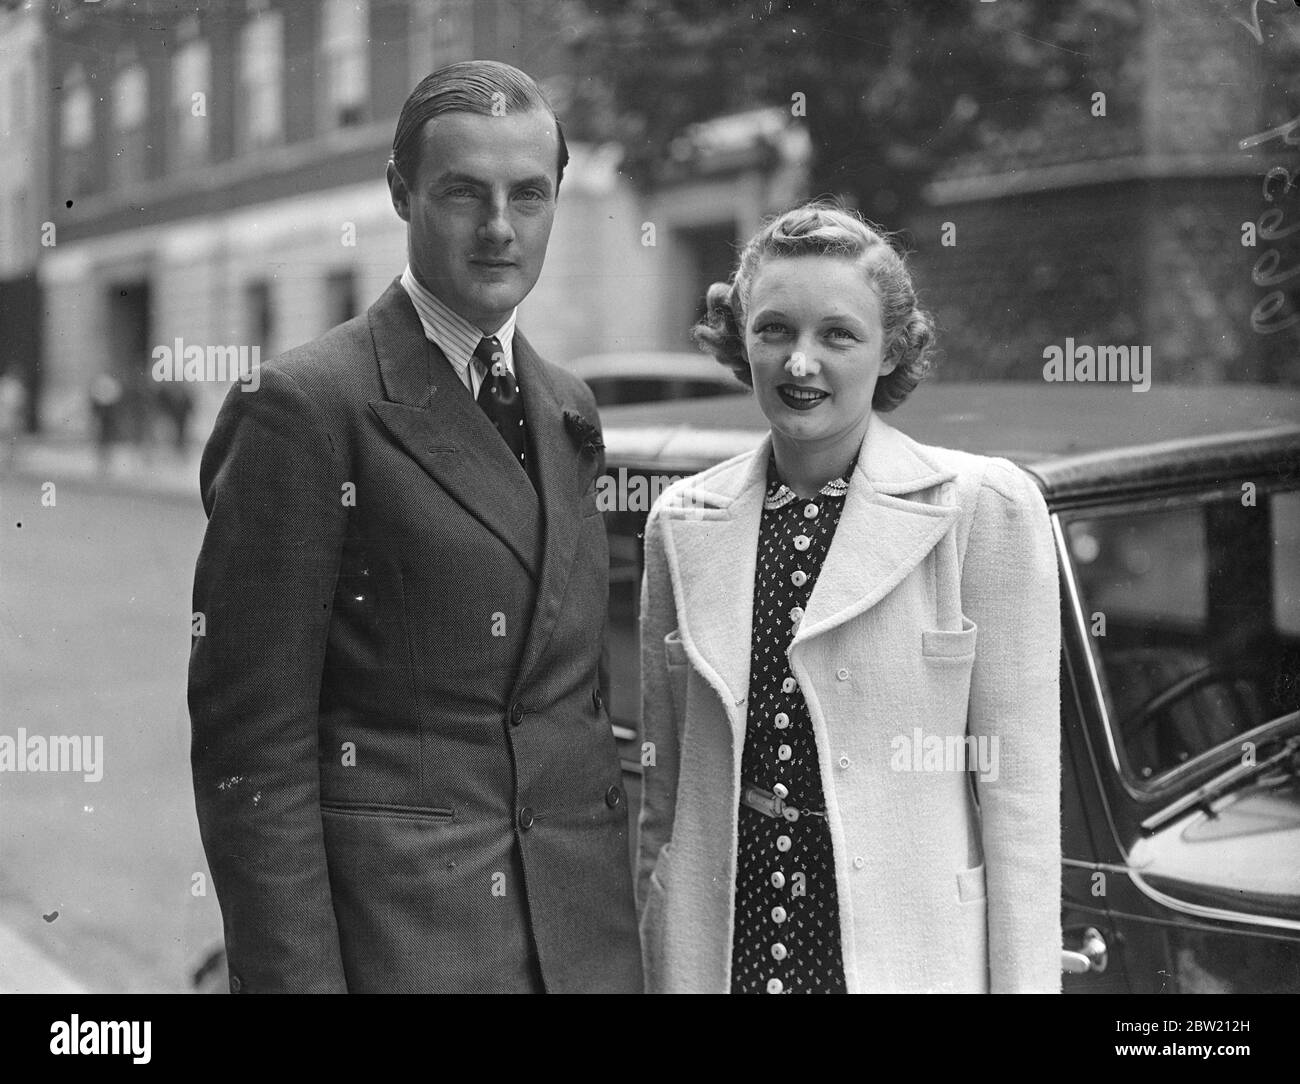 The Earl of Jersey, whose wife's divorcee was made absolute today (Monday), is expected to marry shortly Miss Virginia Cherrill, the American film actress who won fame as the blind flower girl in Charlie Chaplin's film City Lights. The Earl of Jersey and Miss Virginia Cherrill photographed together in London today. 19 July 1937 Stock Photo